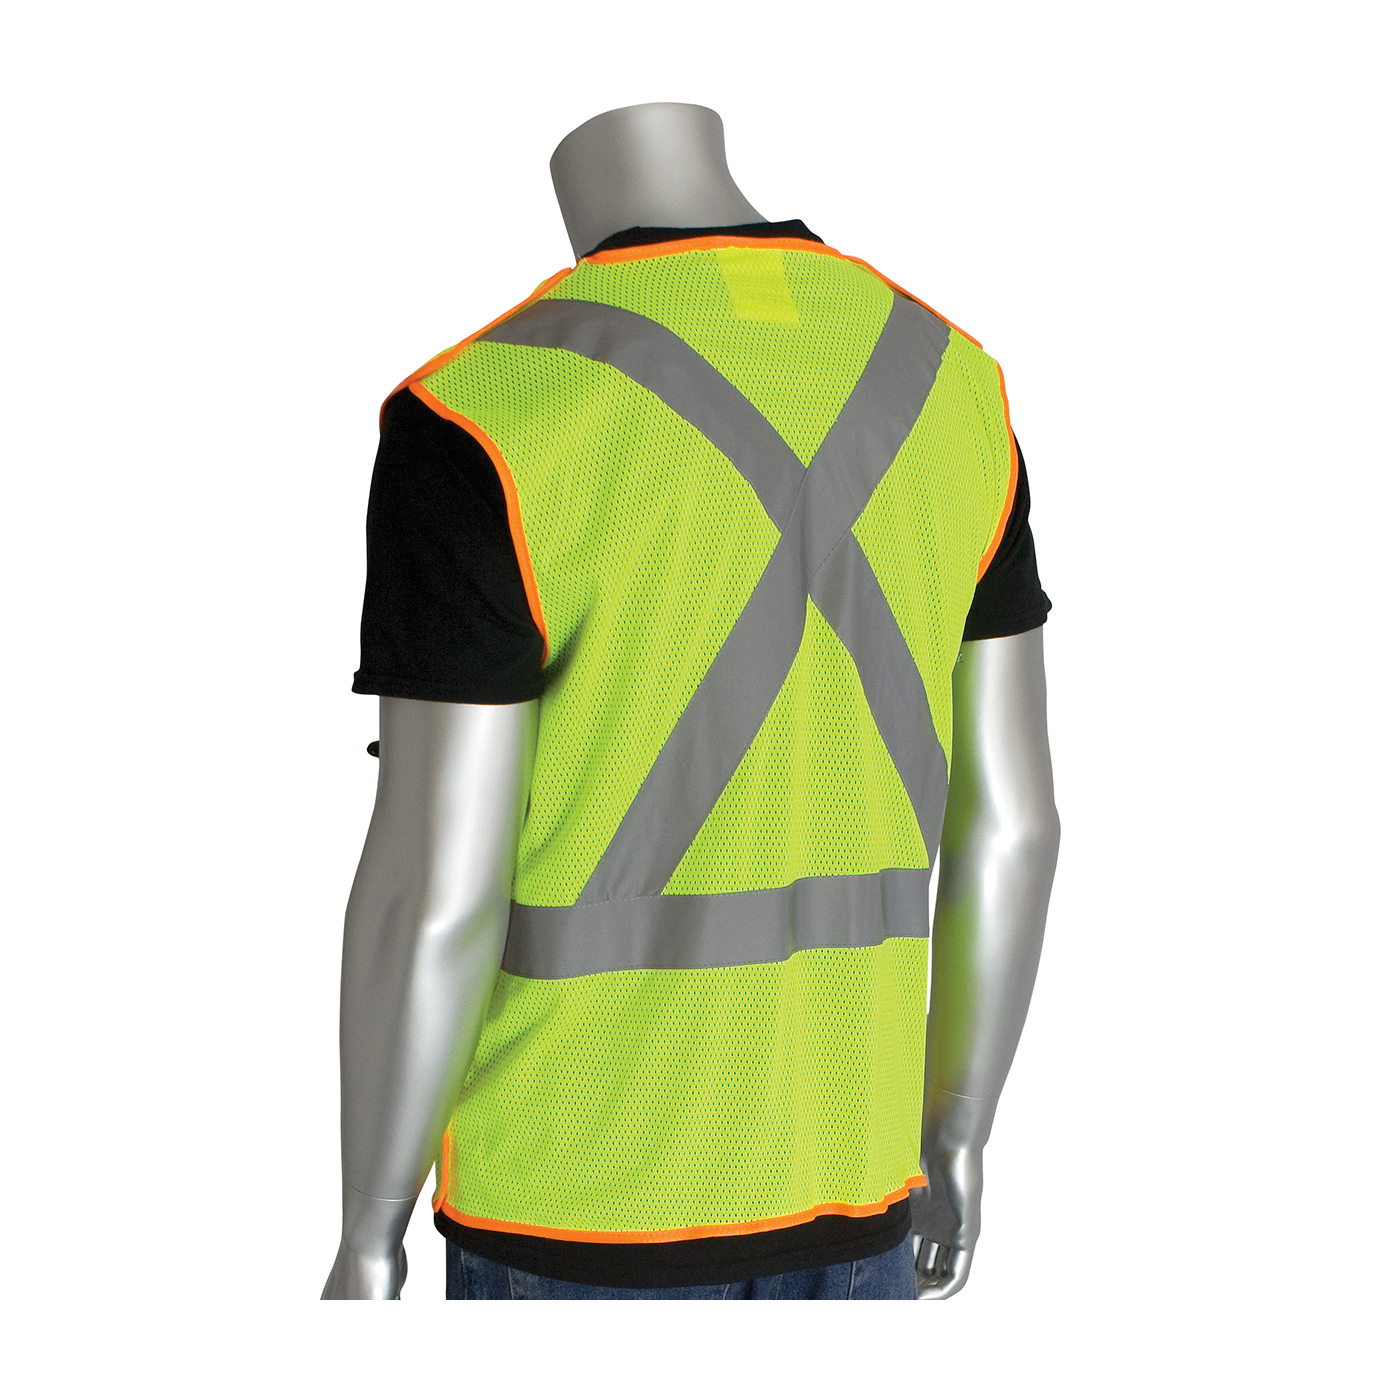 PIP® 302-0210-LY X-Back Safety Vest, Hi-Viz Lime Yellow, Polyester, Hook and Loop Closure, 3 Pockets, ANSI Class: Class 2, Specifications Met: ANSI 107 Type R, CAN/CSA Z96